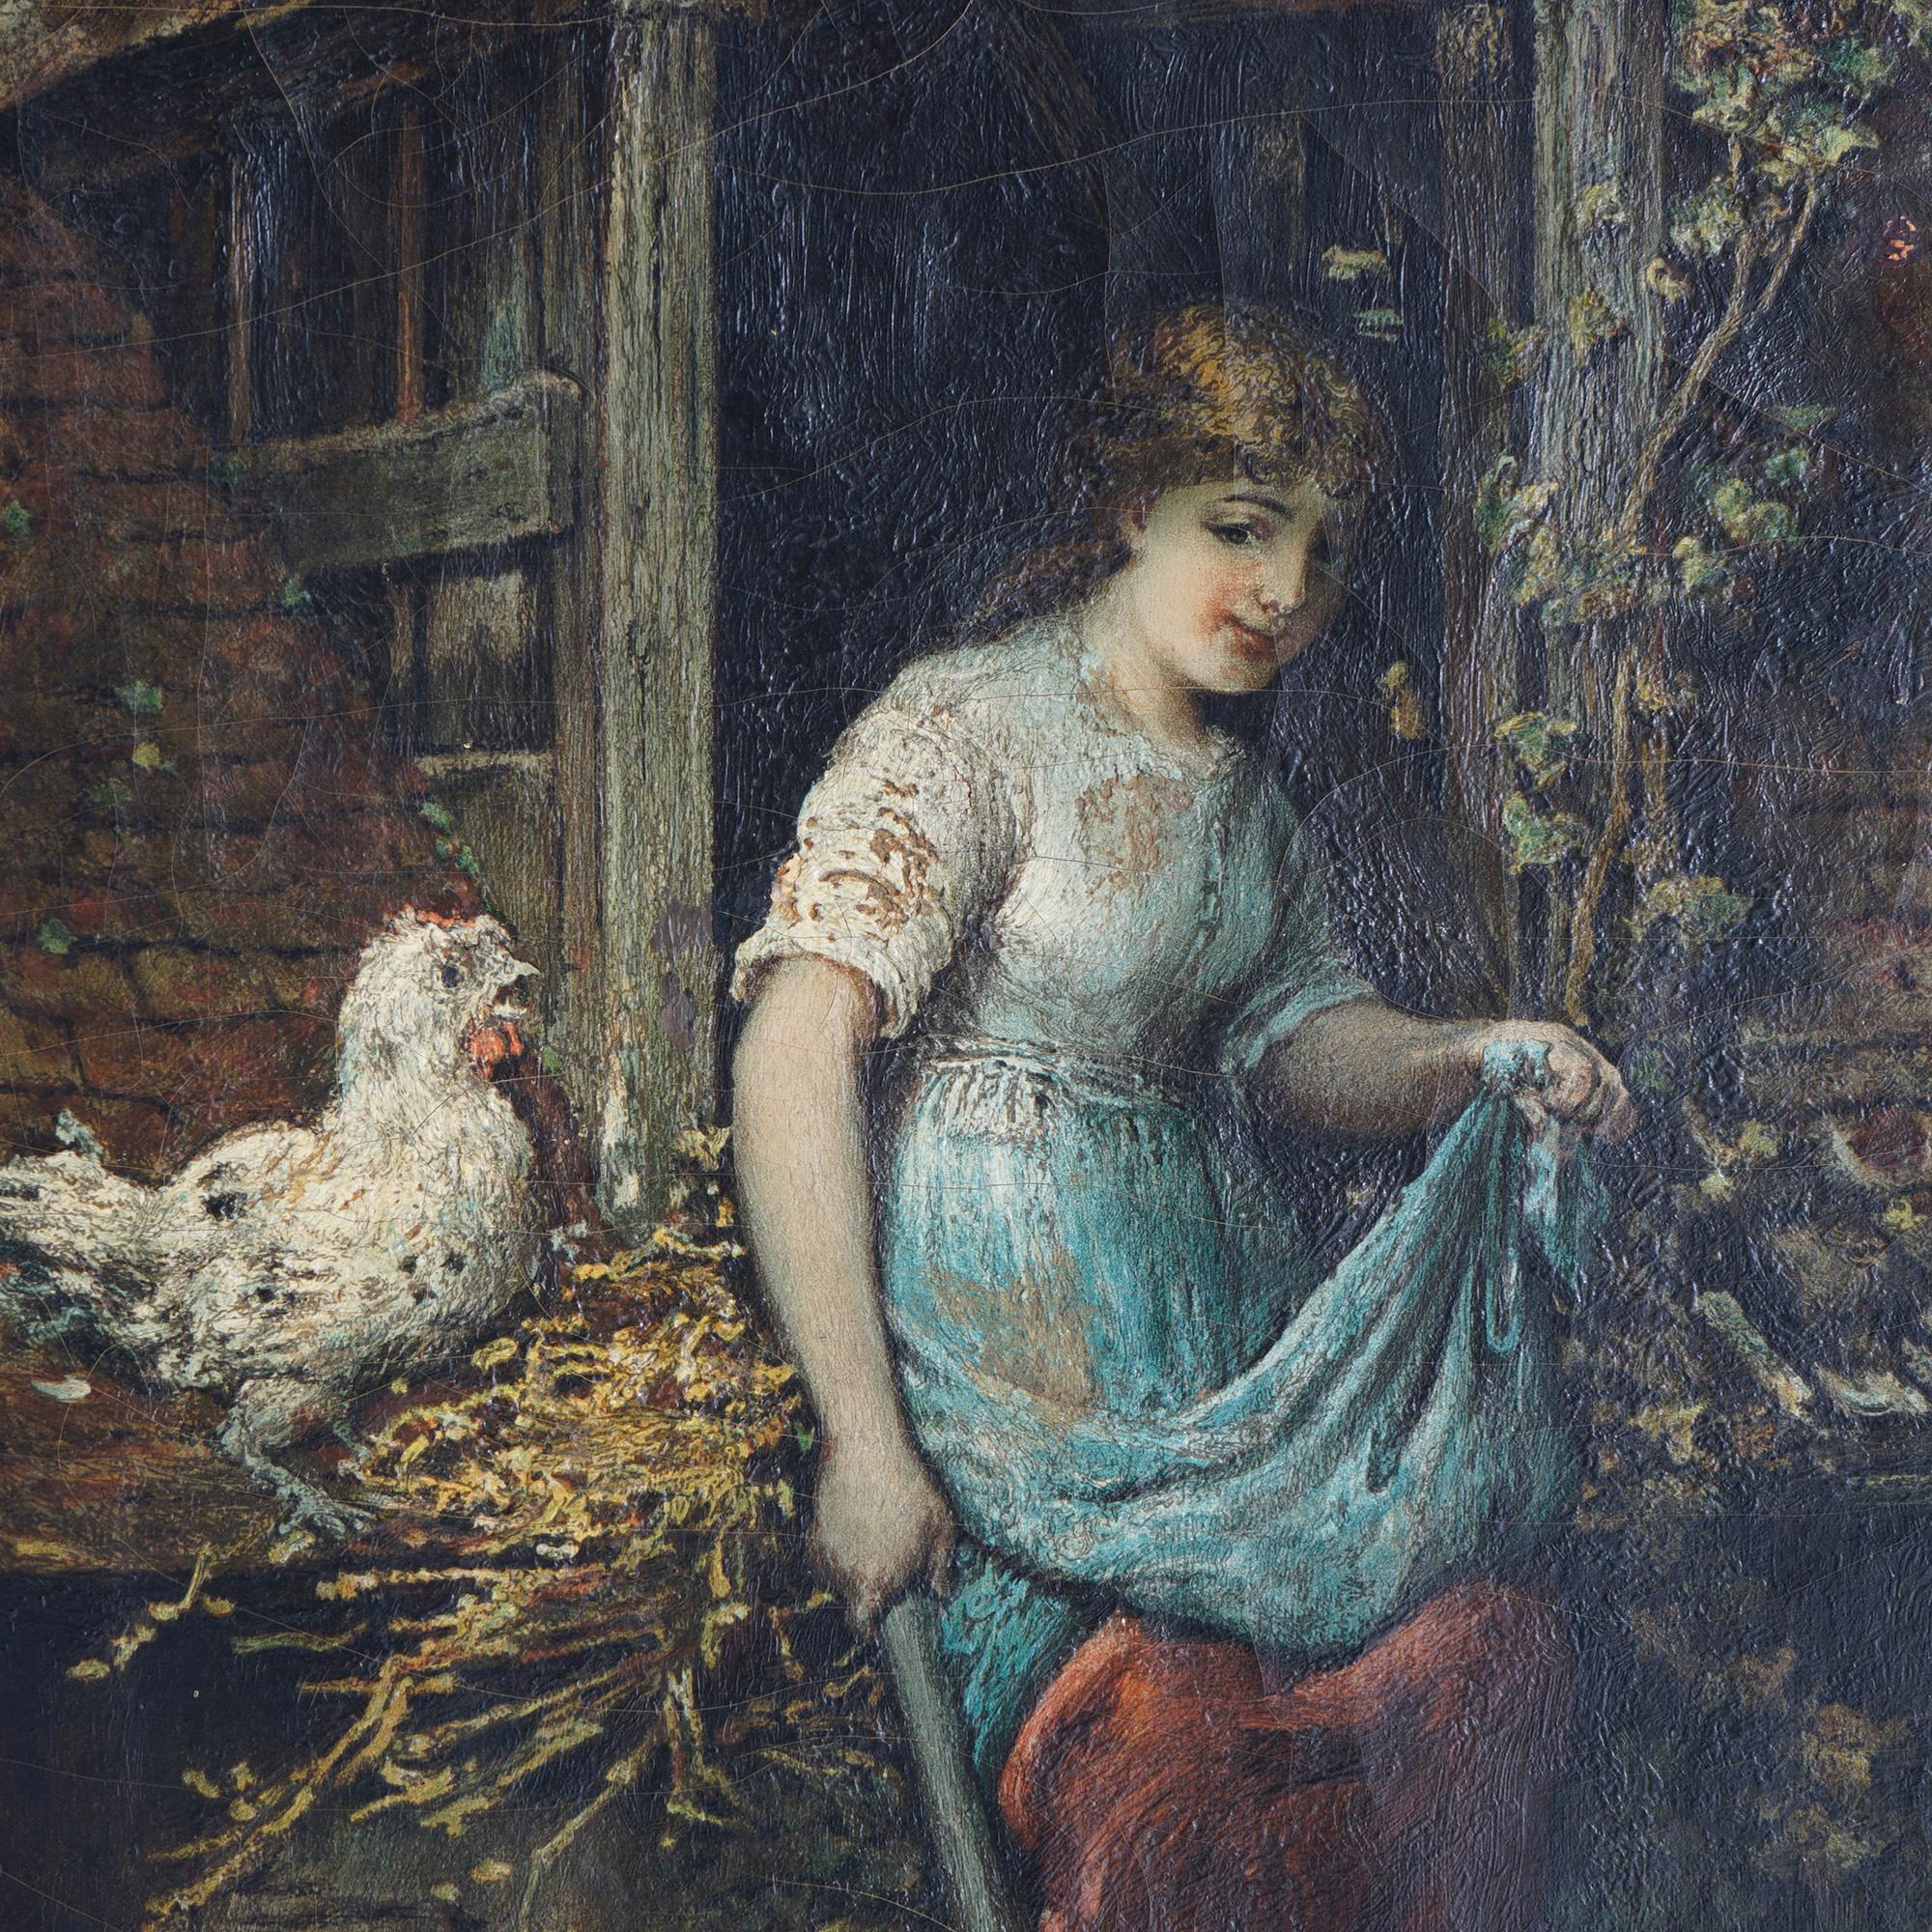 European Antique Genre Painting by Bragery, Farm Scene with Girl & Chicken, c1890